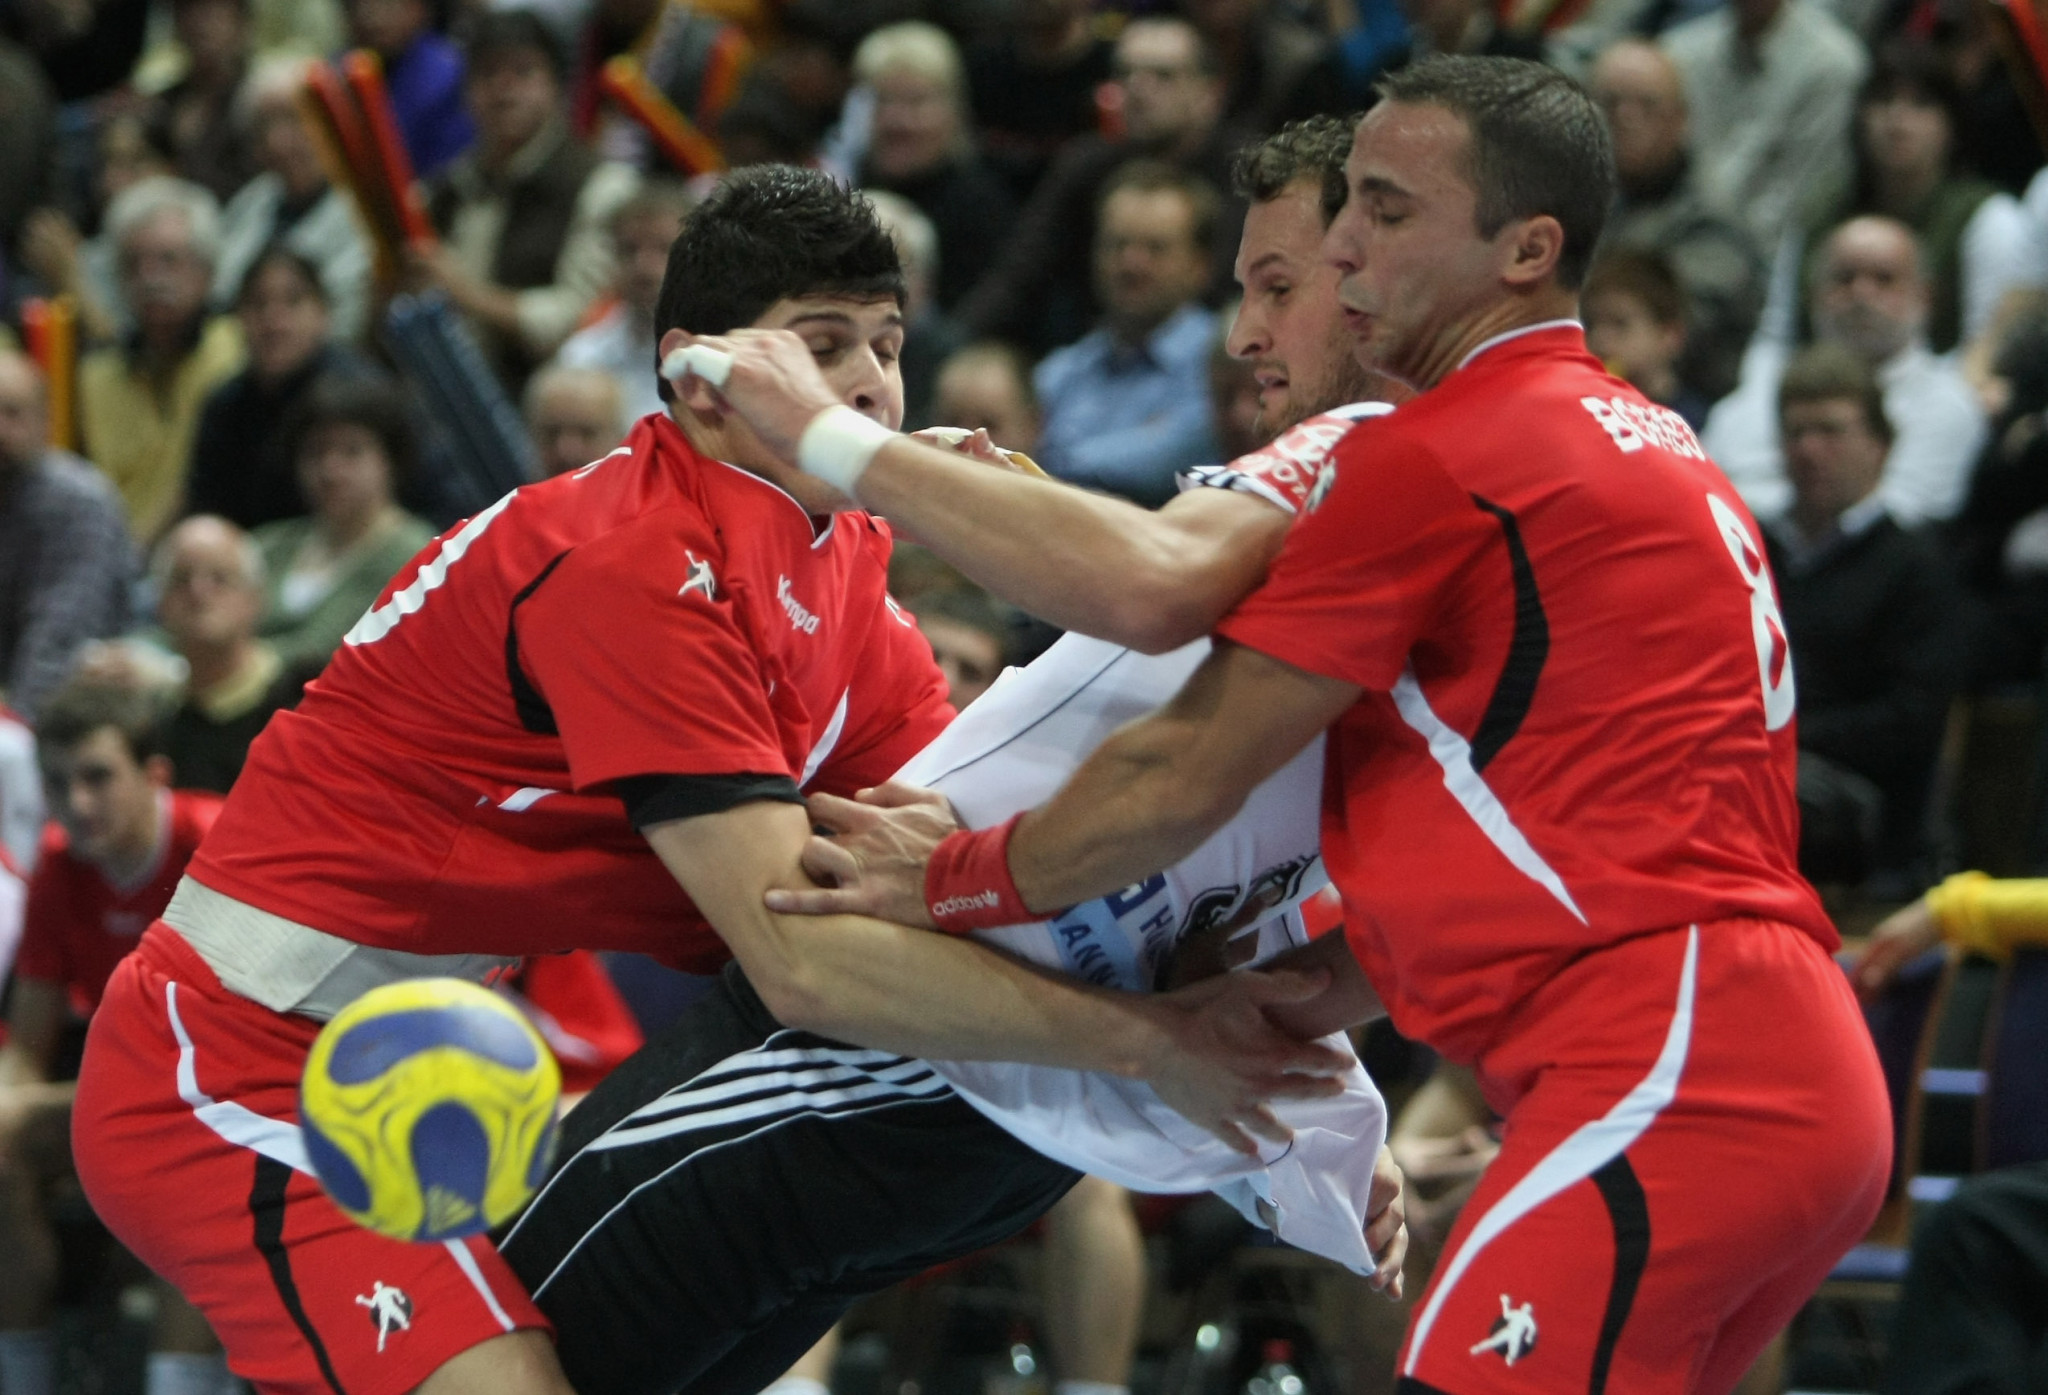 Absence of former champions leaves field wide open in IHF Emerging Nations Championship 